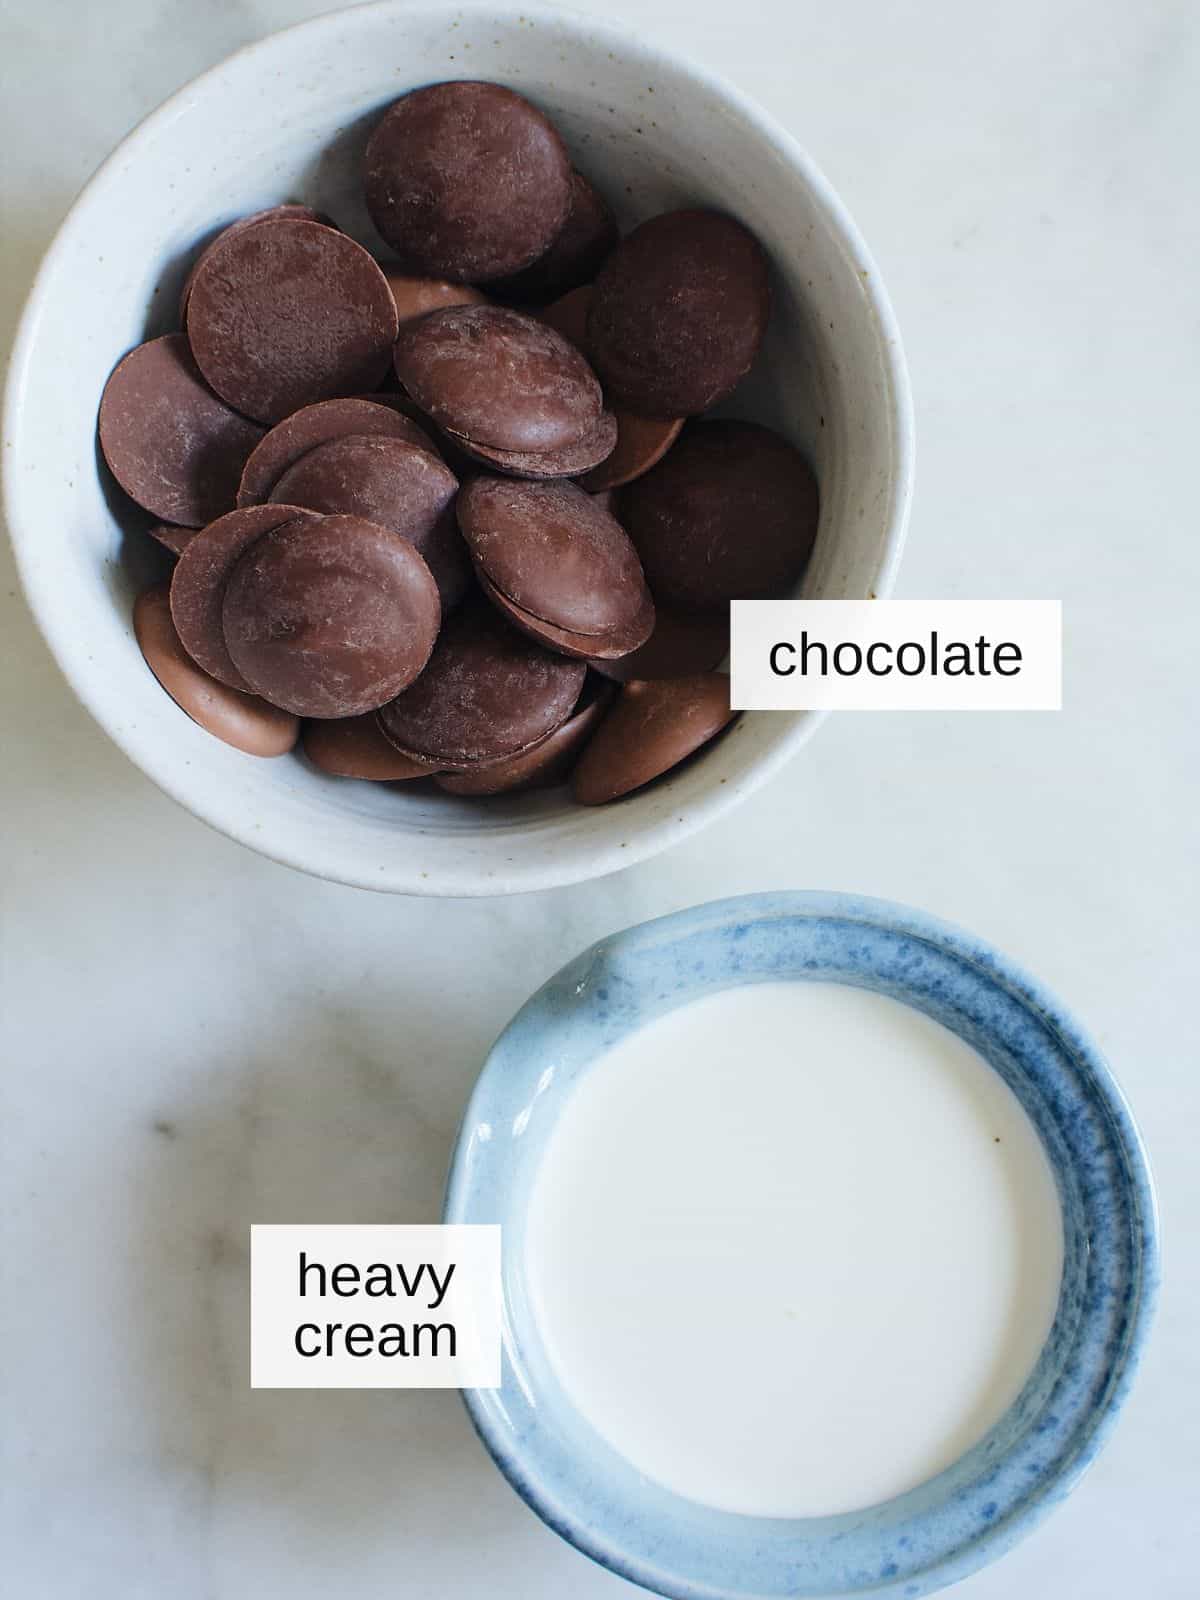 ingredients for chocolate dipping sauce, including chocolates and heavy cream.